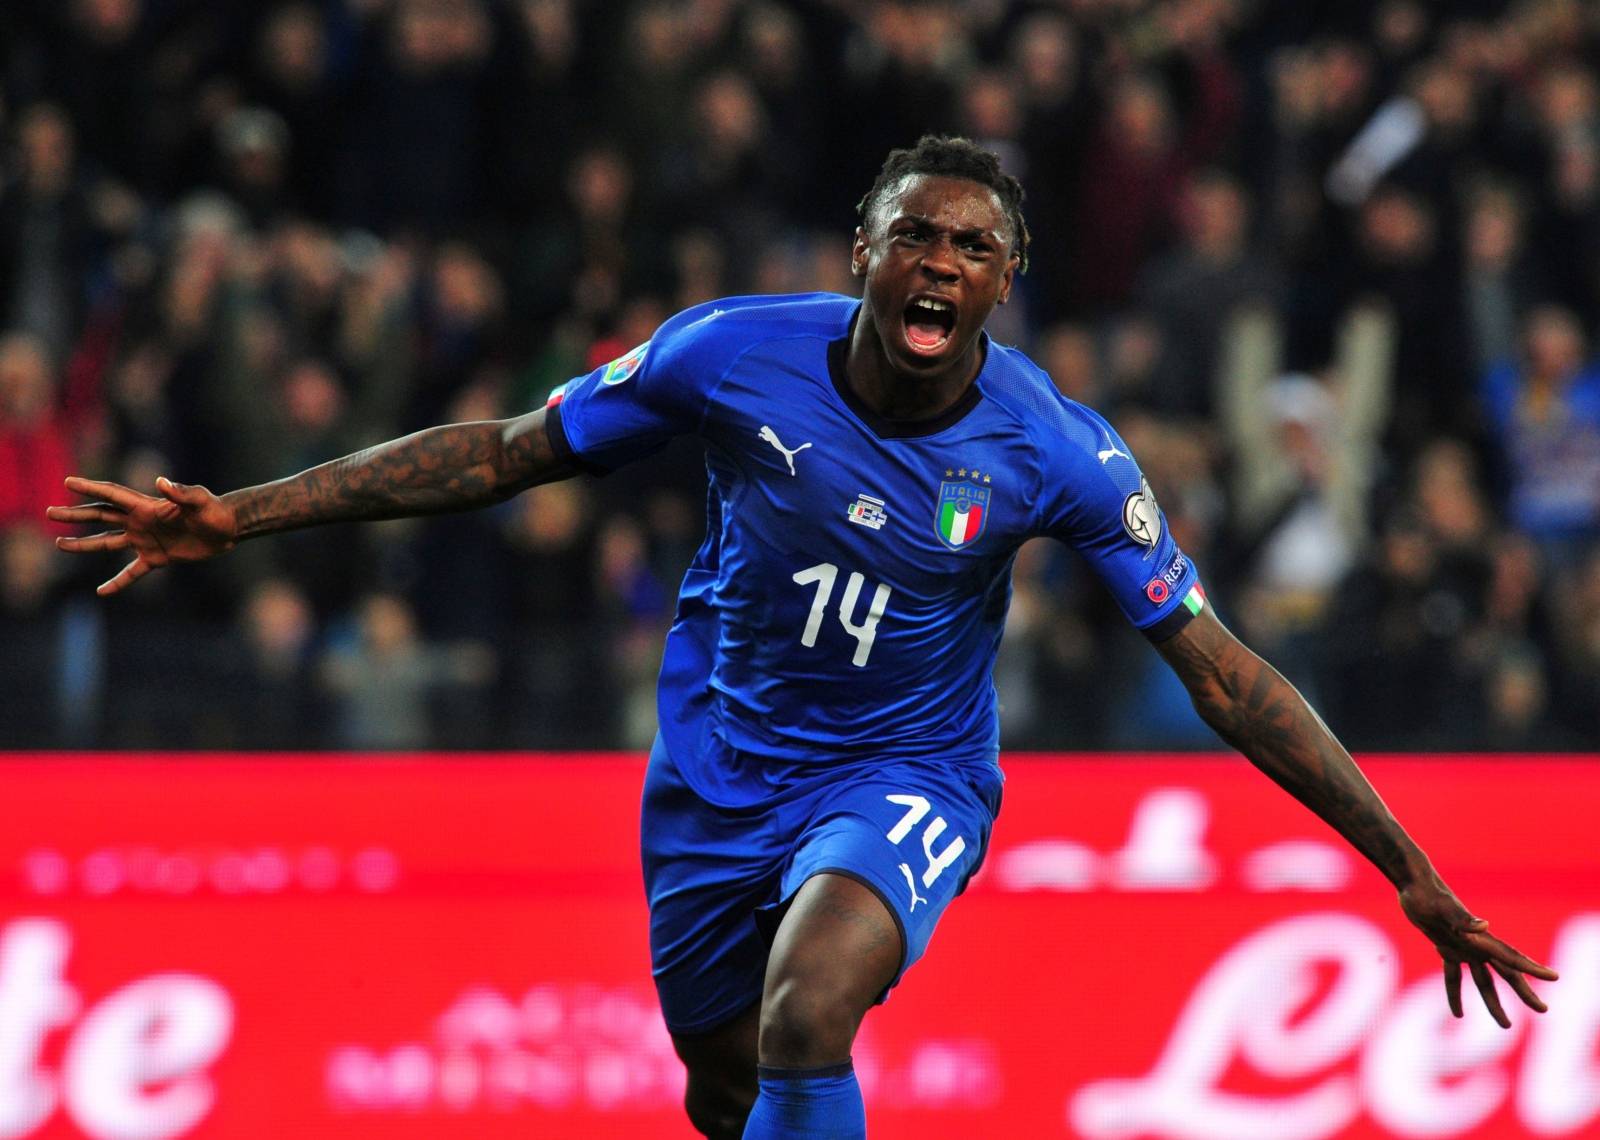 FILE PHOTO: Italy striker Moise Kean celebrates scoring their second goal in a European championship qualifying game against Finland.